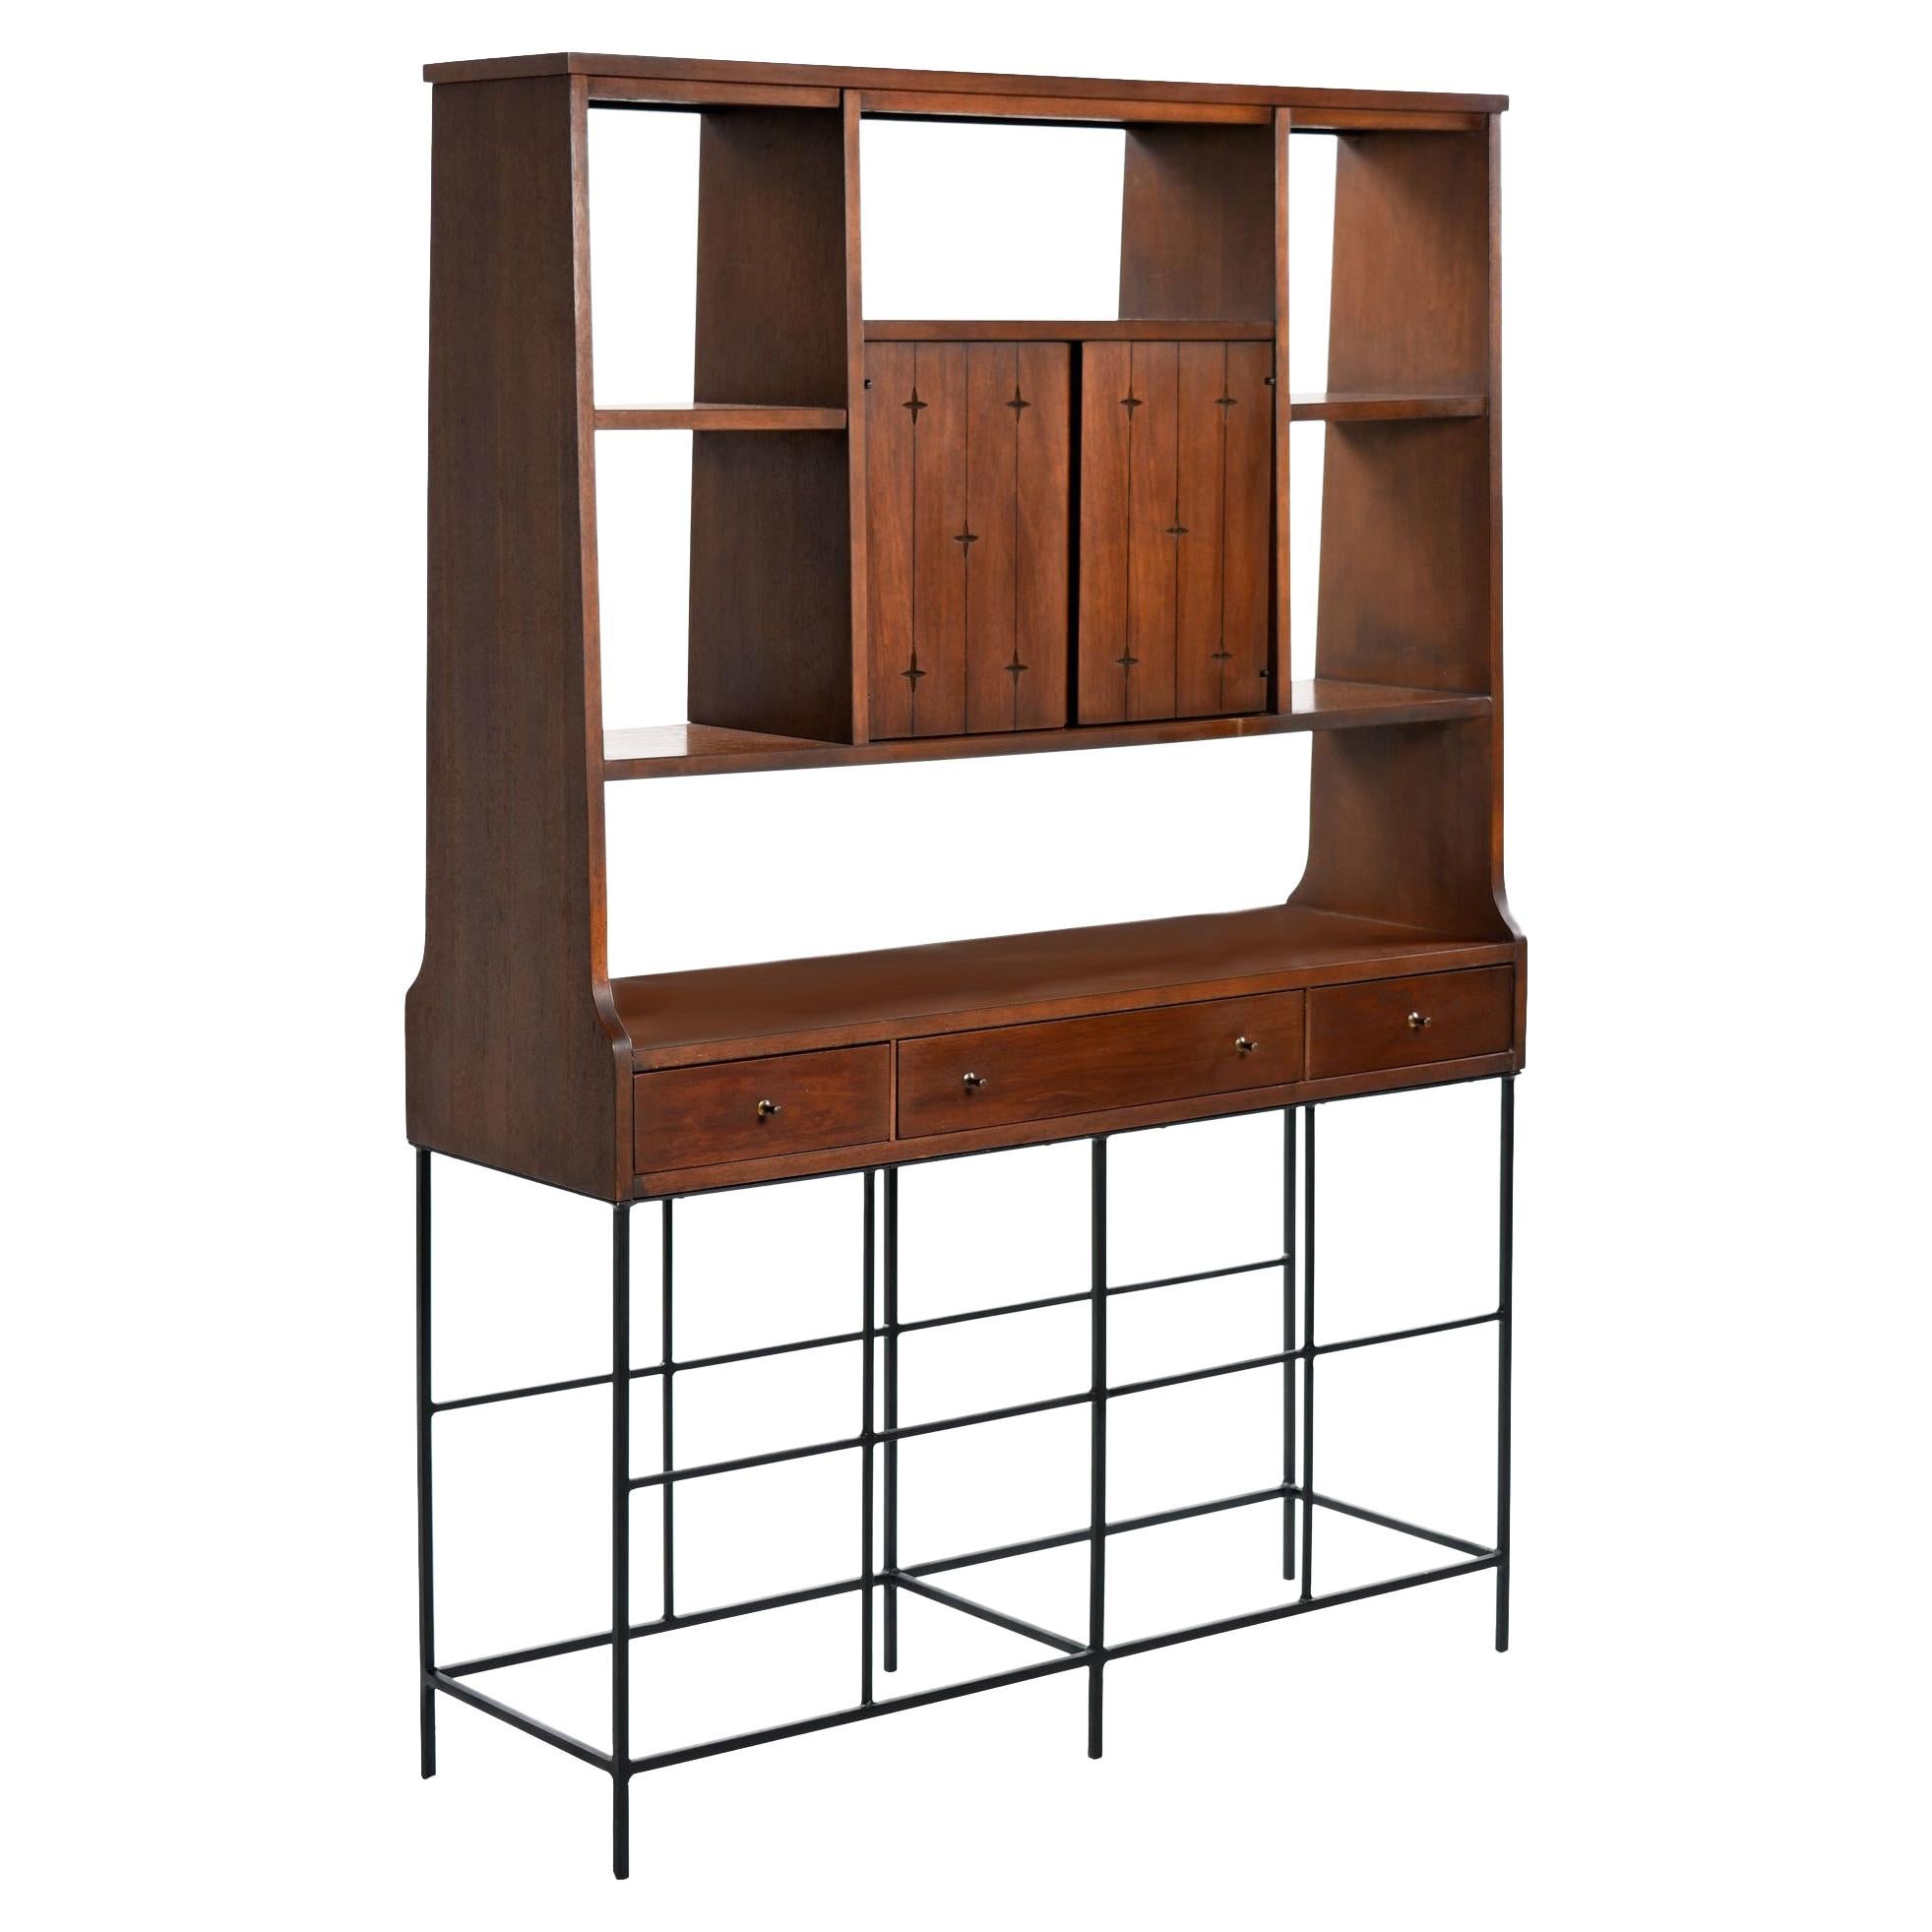 One of a kind Mid-Century Modern Broyhill Saga room divider bookcase with custom made base. One of the most celebrated lines of the Mid-Century Modern Broyhill premier series, the room divider is made of walnut, and features the distinctive star